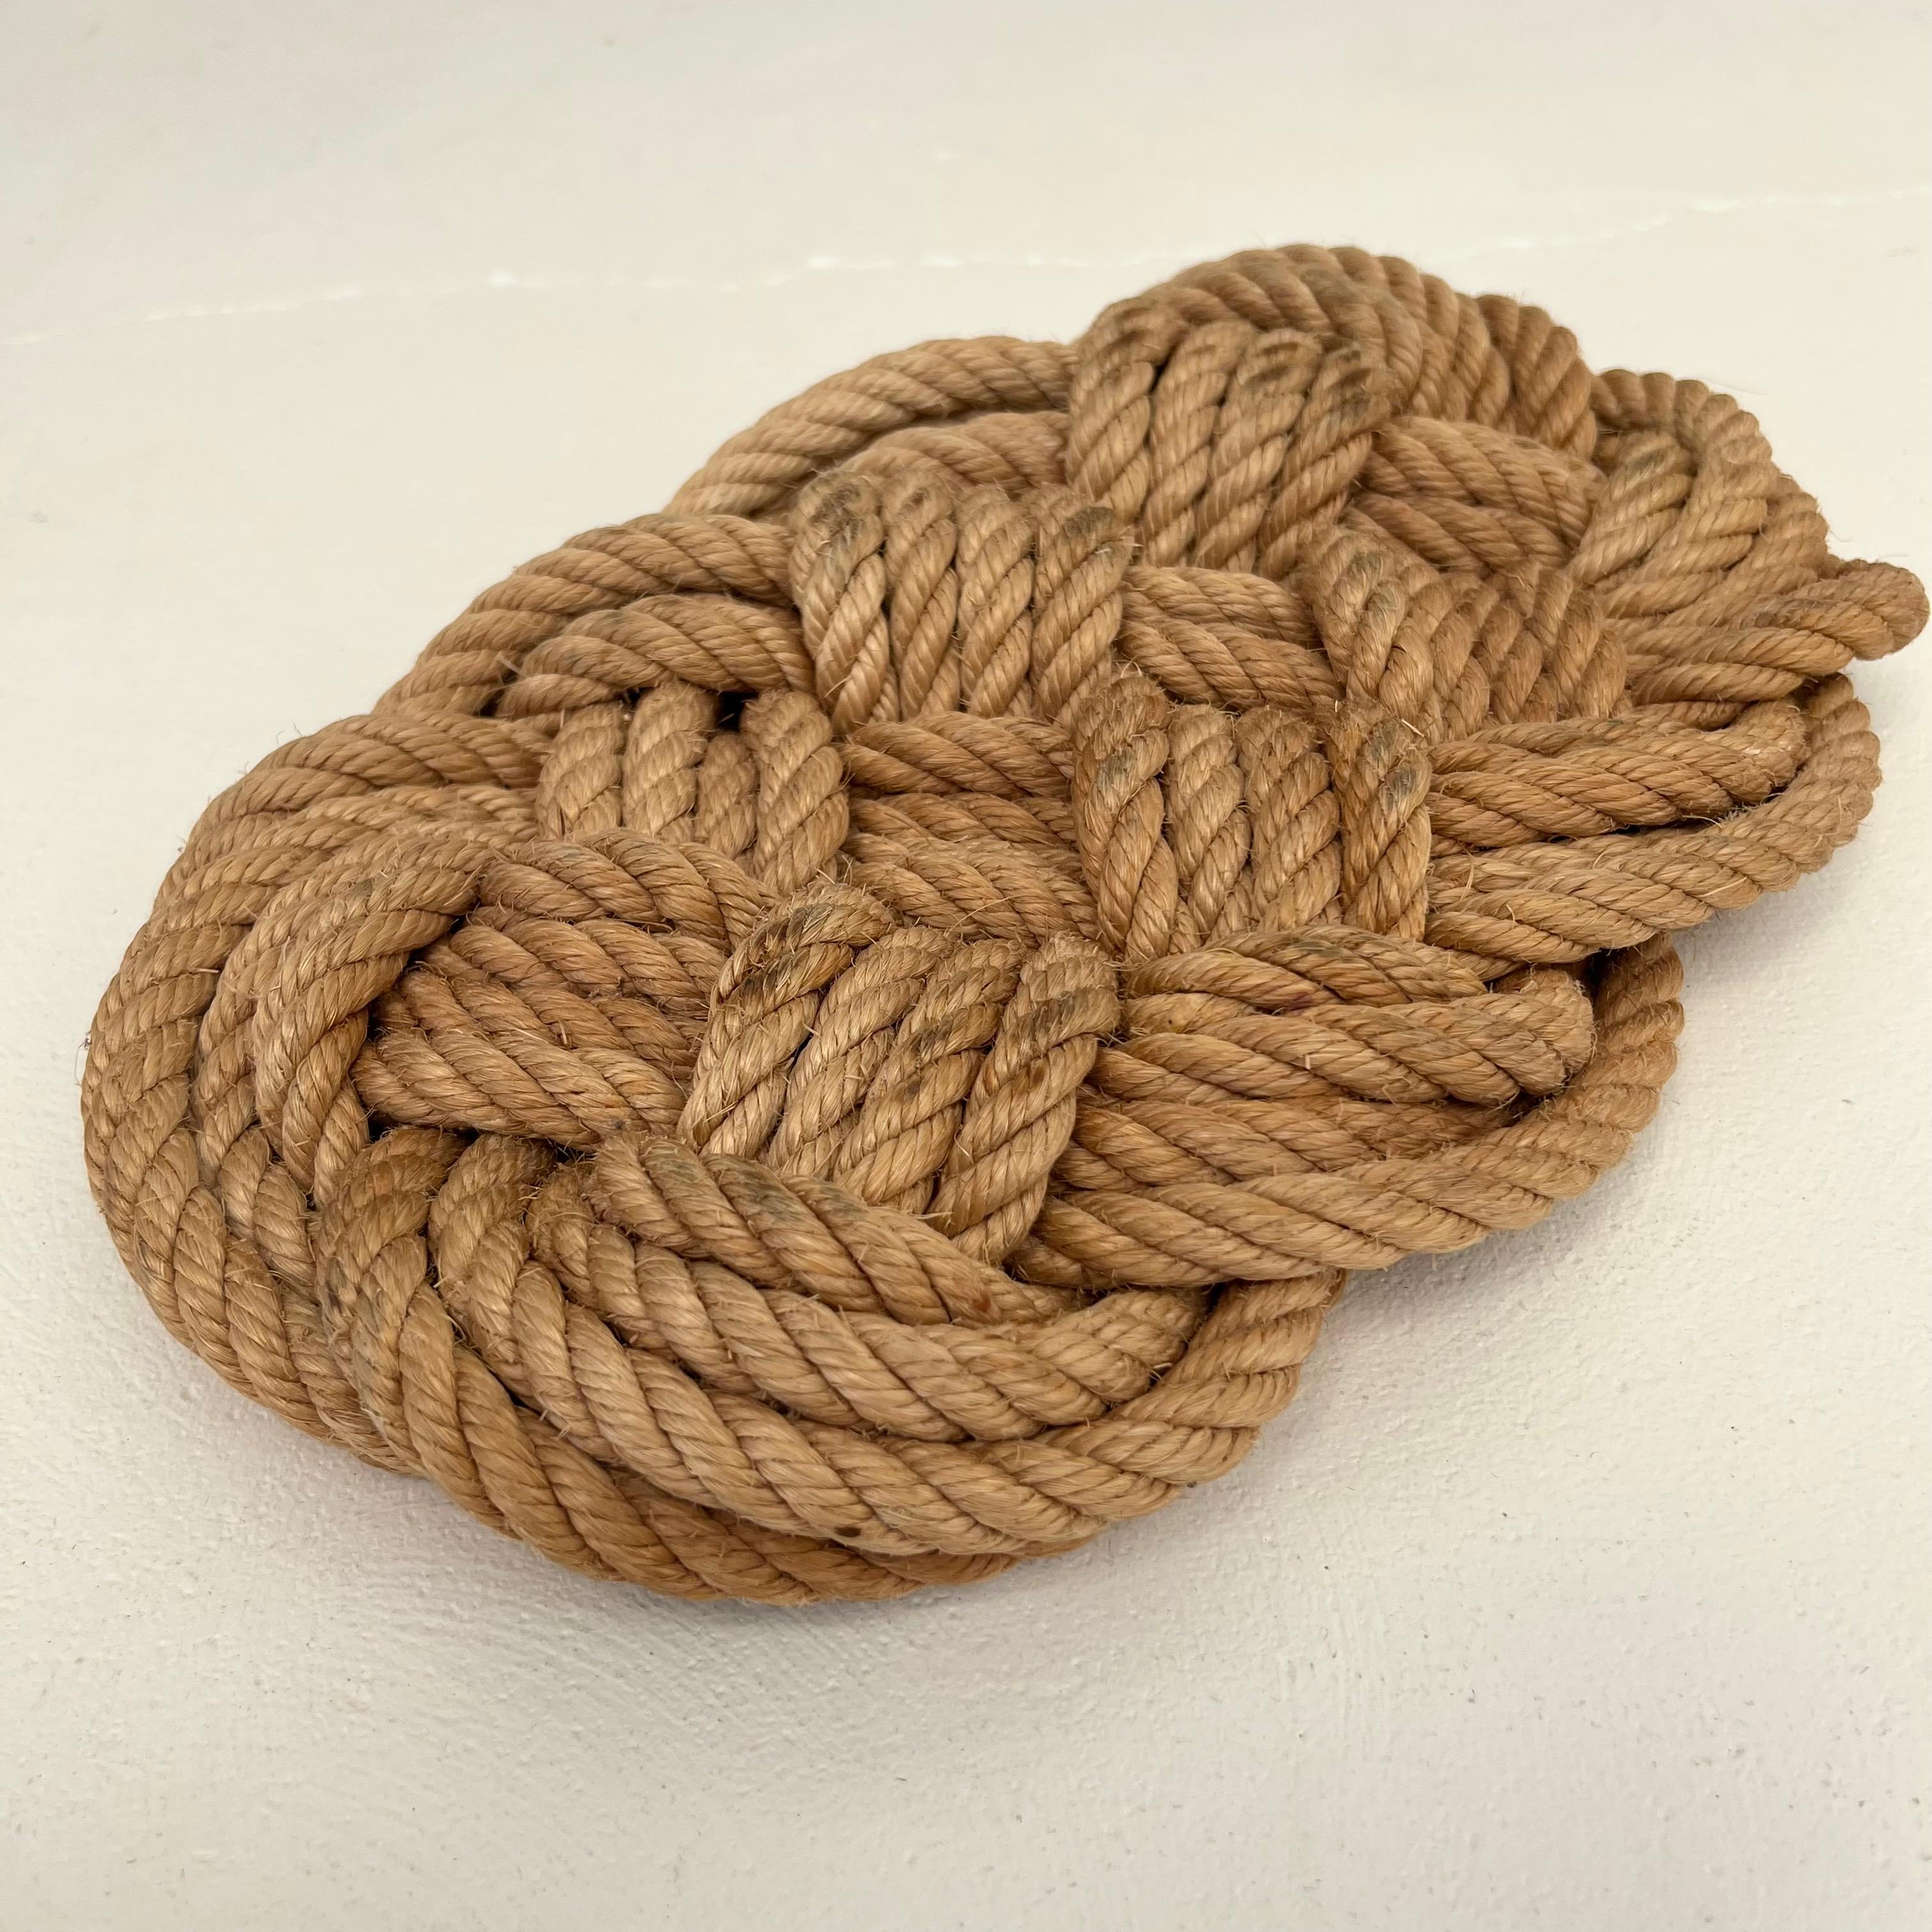 Circa 1960 vintage French rope hot plate in the style of French-Swiss husband-and-wife duo Adrien Audoux and Frida Minet. 

Known for their playful and unique modernist designs, Audoux and Minet adopted a rustic style in their work, integrating